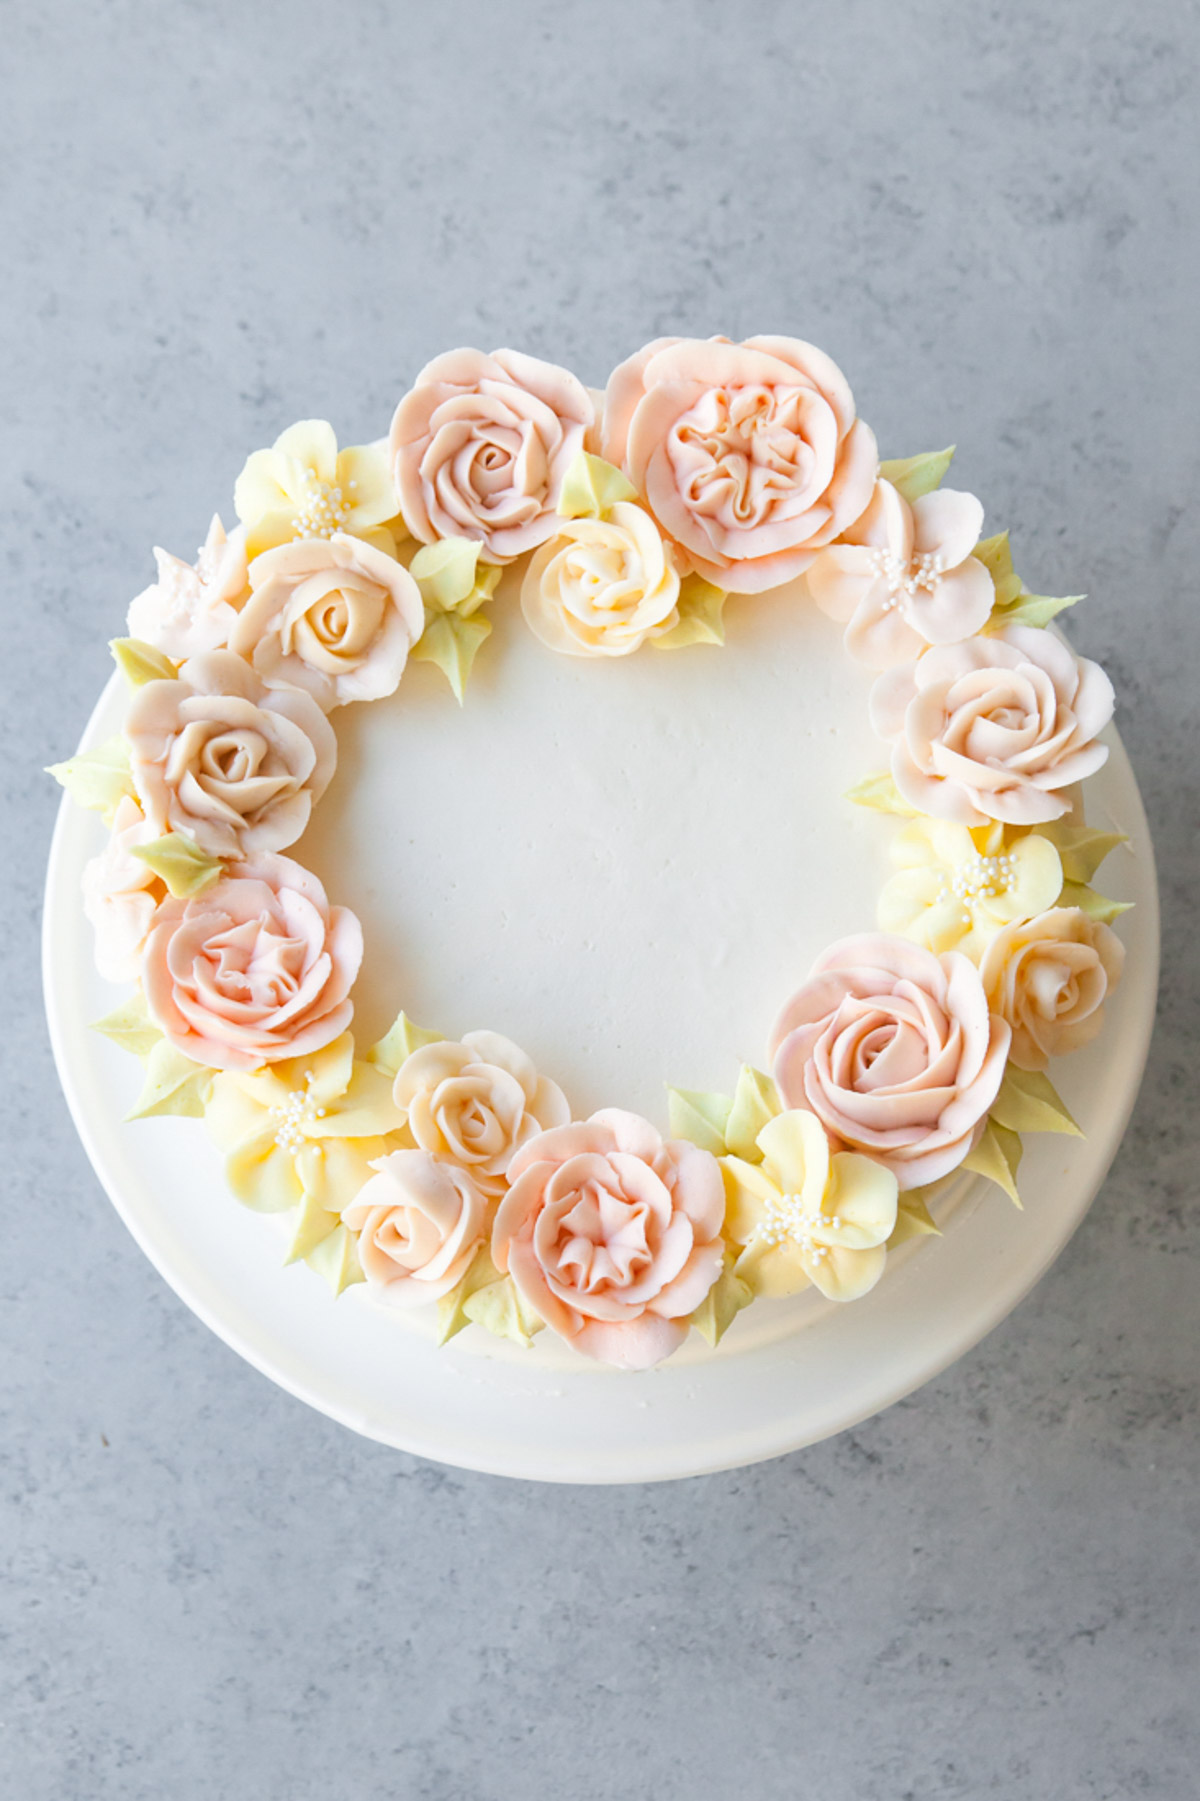 A four layer carrot cake with cream cheese frosting and beautiful buttercream roses on the top.